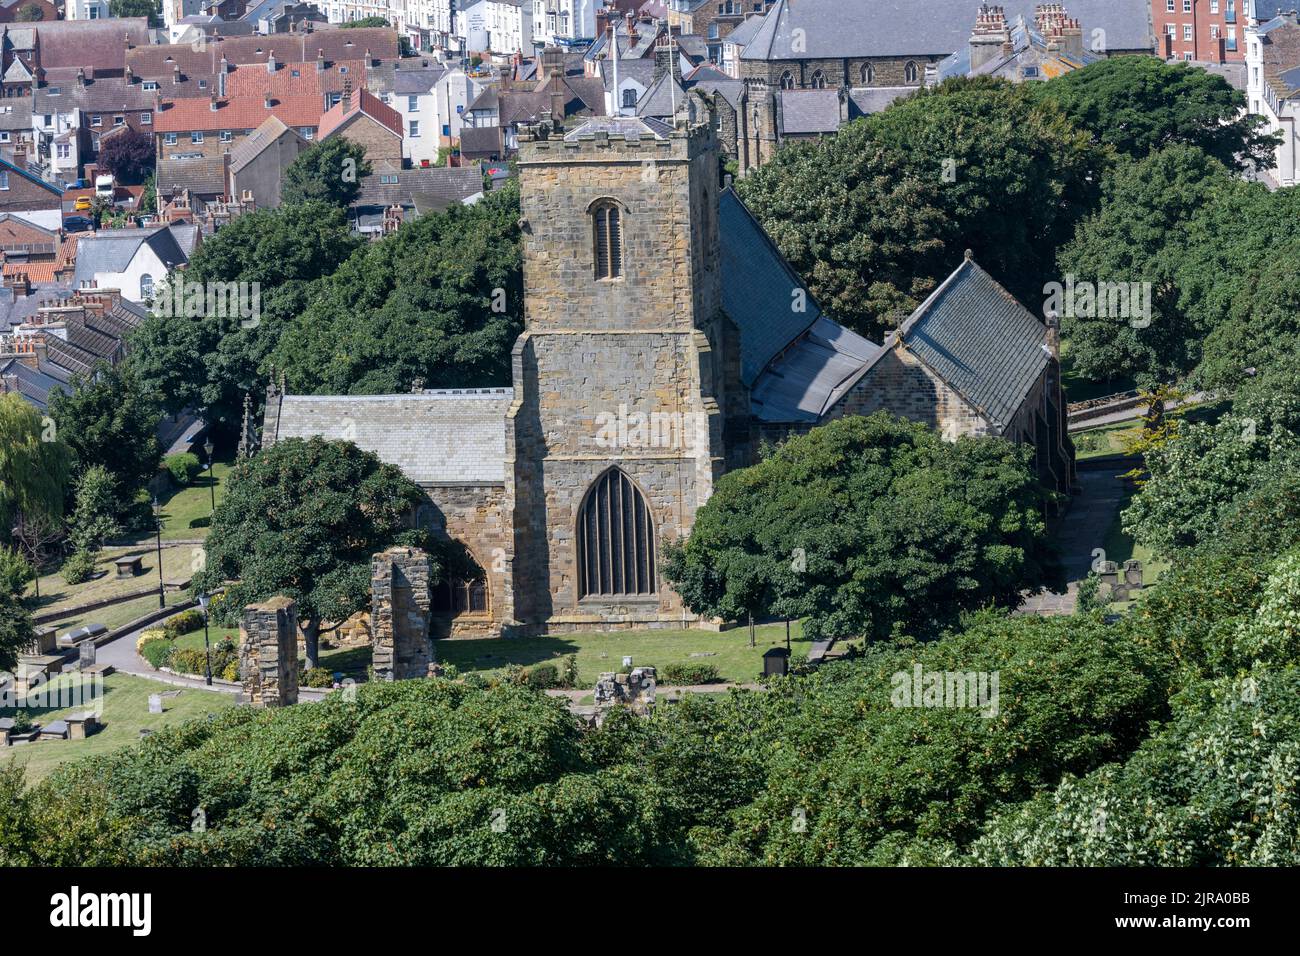 St Mary's Church, Scarborough, North Yorkshire, England, UK  - grade I listed building Stock Photo